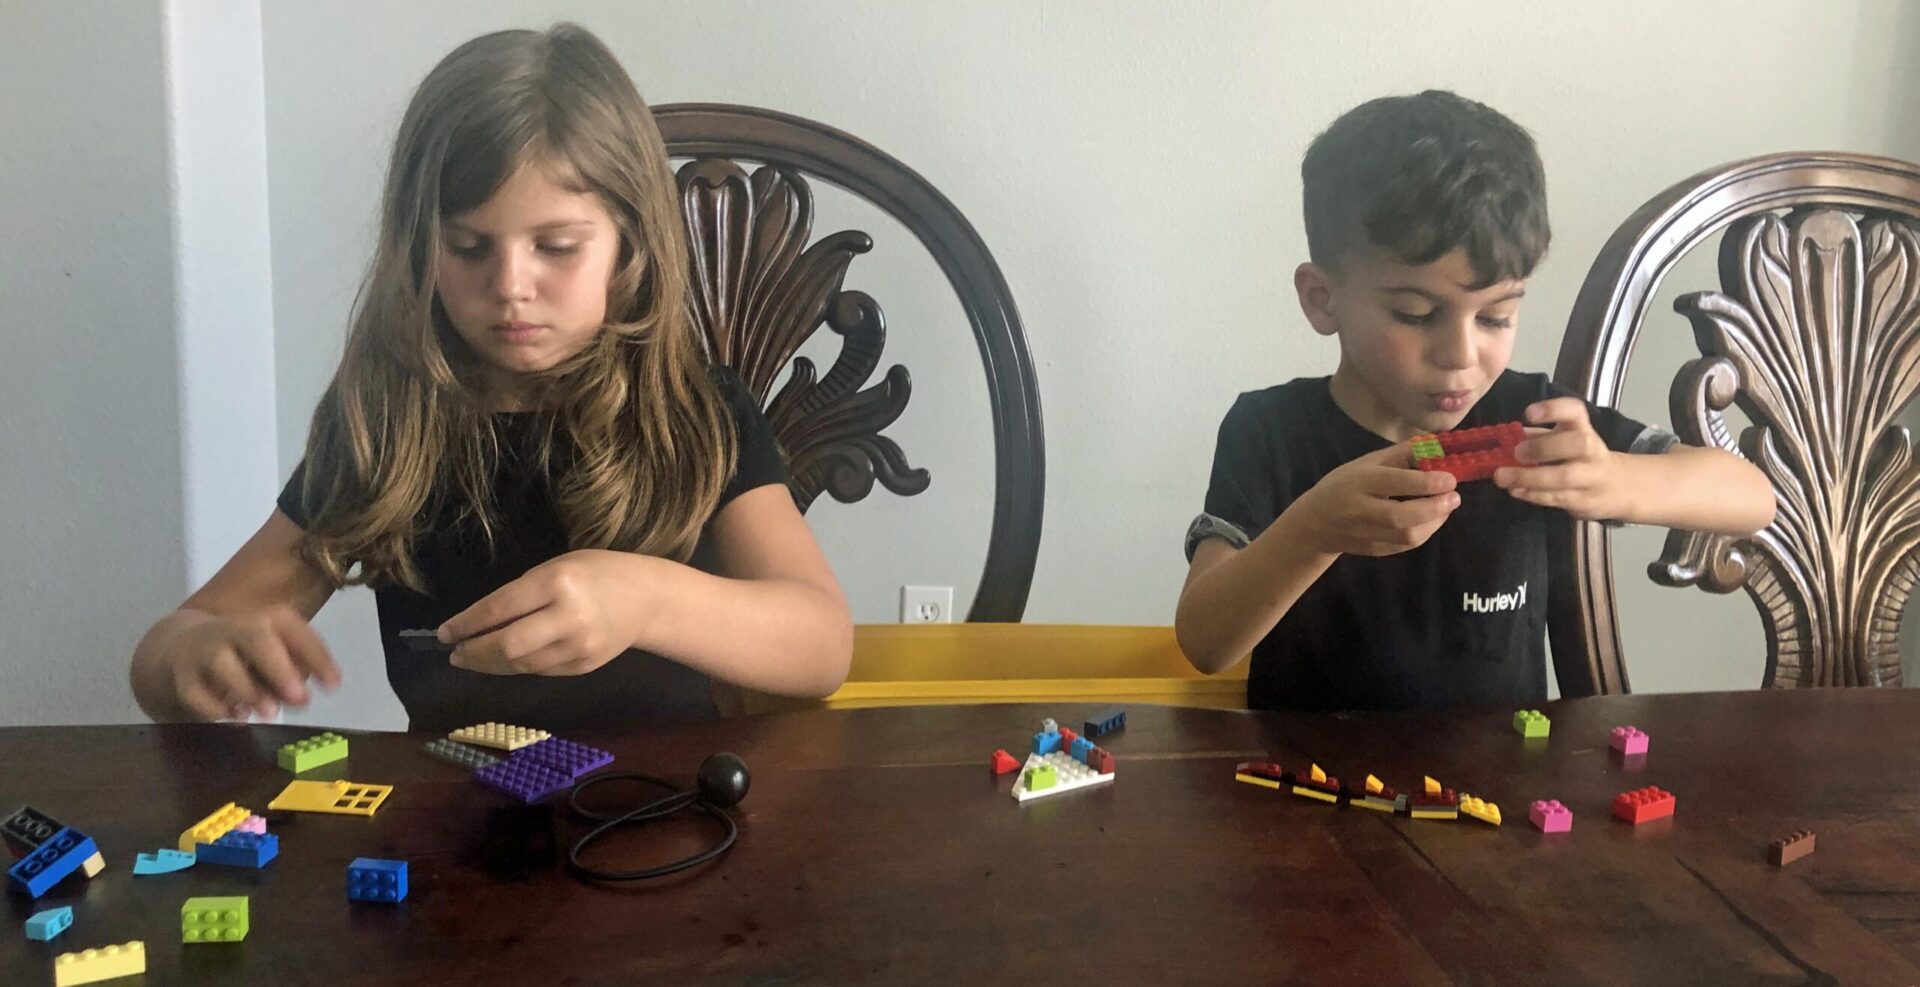 Liliana, 6 and Rocco, 4 from Houston, TX, work on a remote STEAM ship lesson in buoyancy from the Steamship Historical Society of America. They built a LEGO boat to test how things float while at home during the COVID-19 crisis.